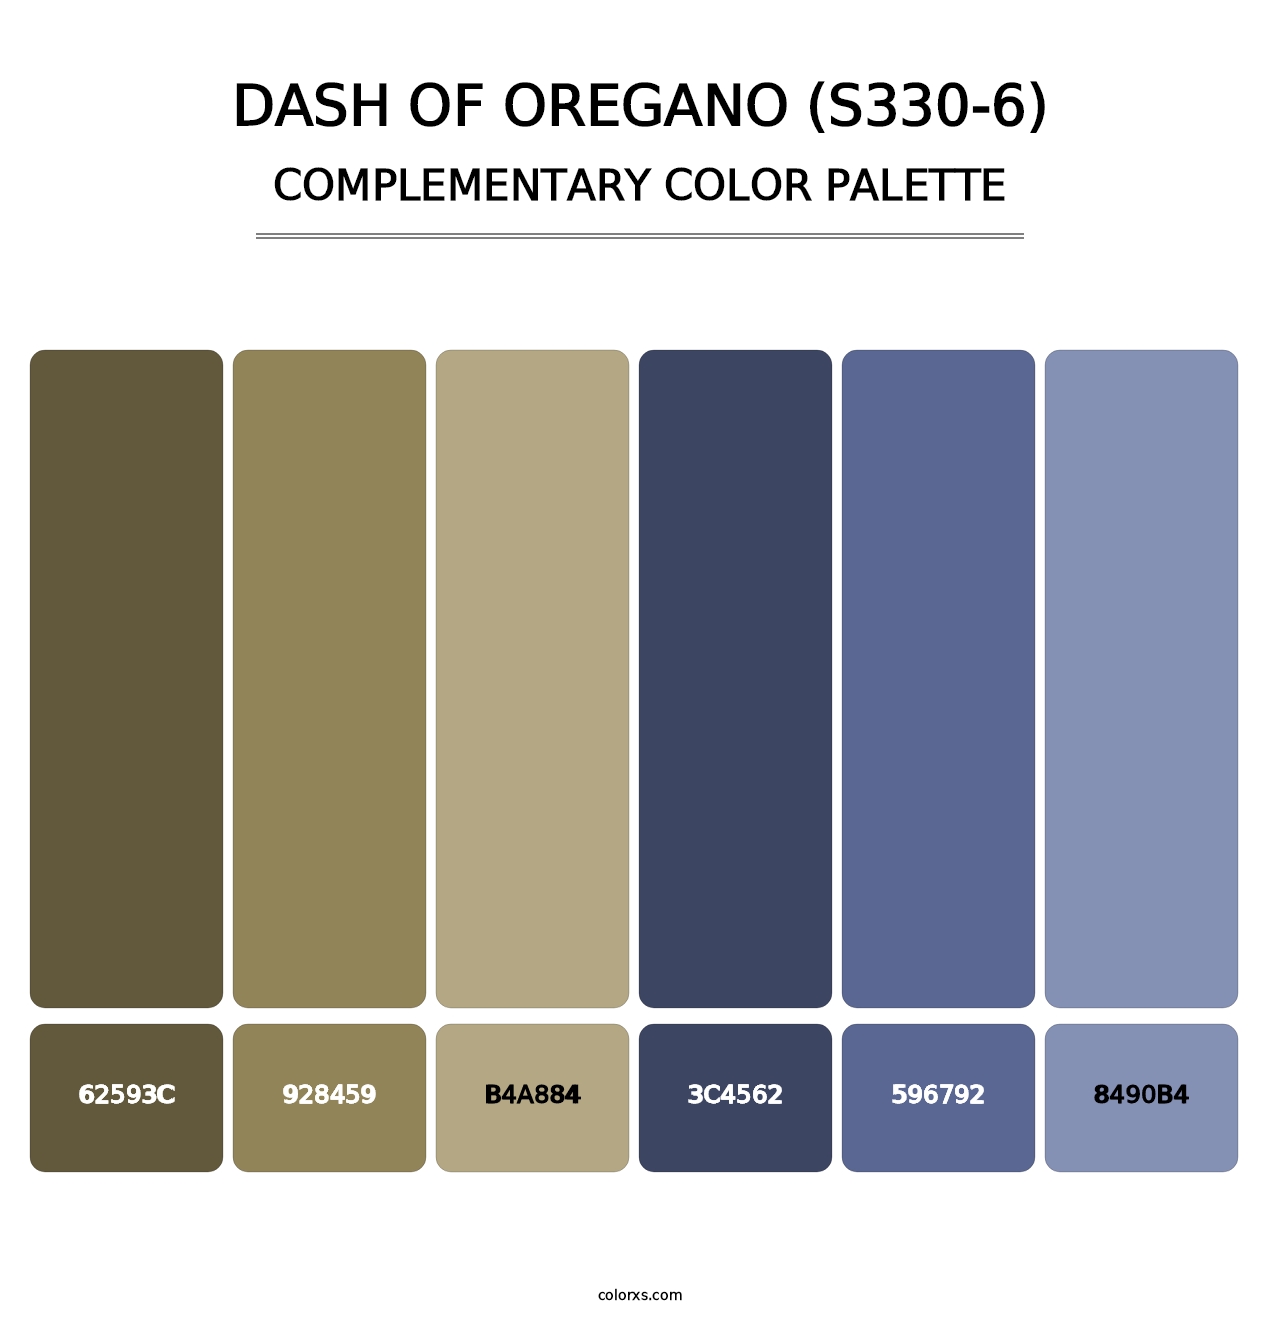 Dash Of Oregano (S330-6) - Complementary Color Palette